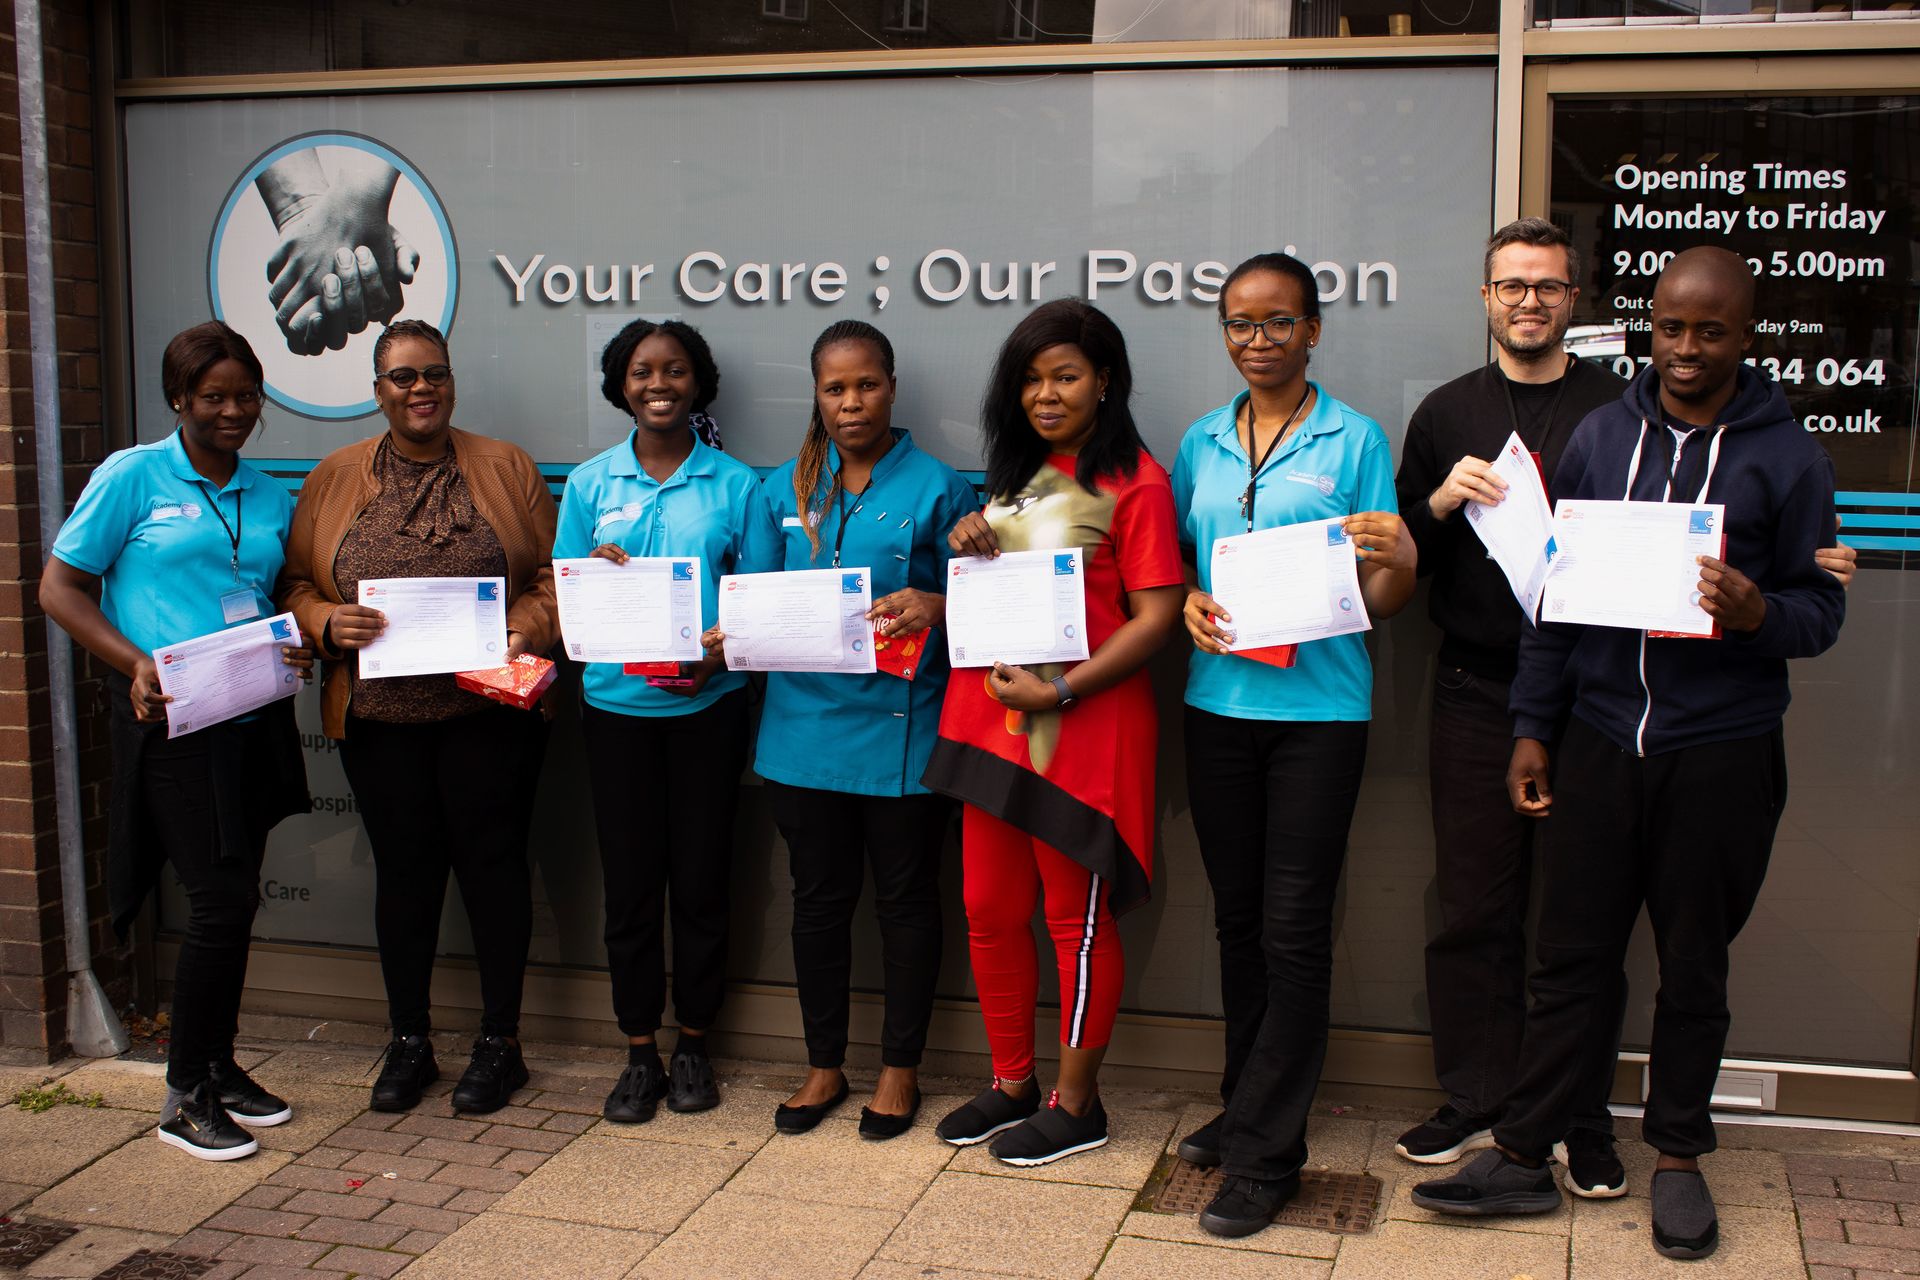 Group photo of people receiving care certificate